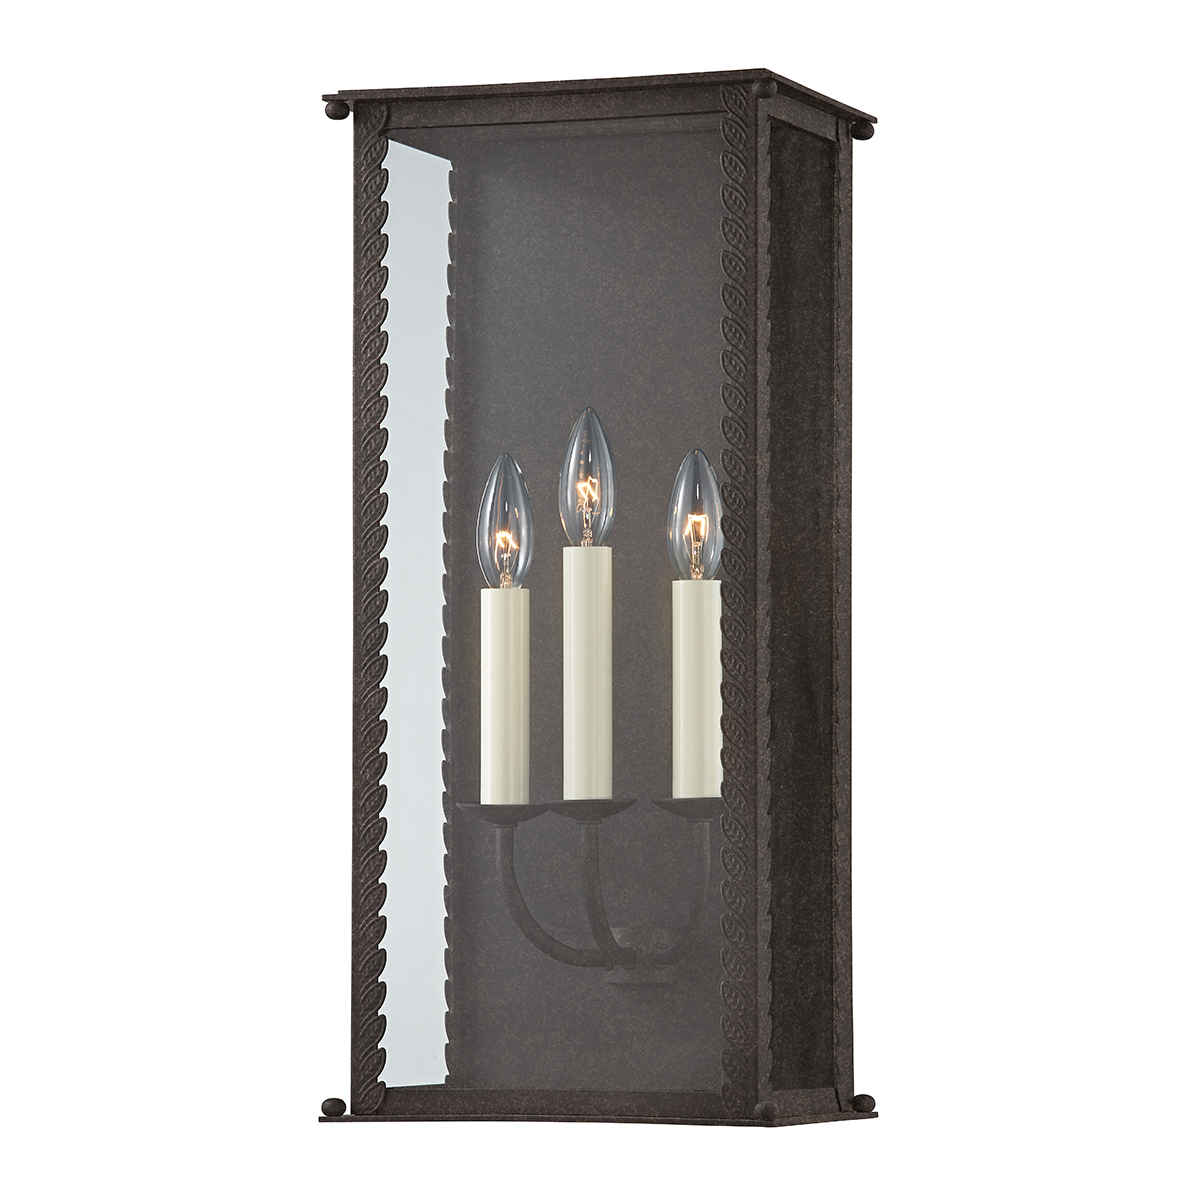 Troy ZUMA 3 LIGHT LARGE EXTERIOR WALL SCONCE B6713 Outdoor l Wall Troy Lighting FRENCH IRON  